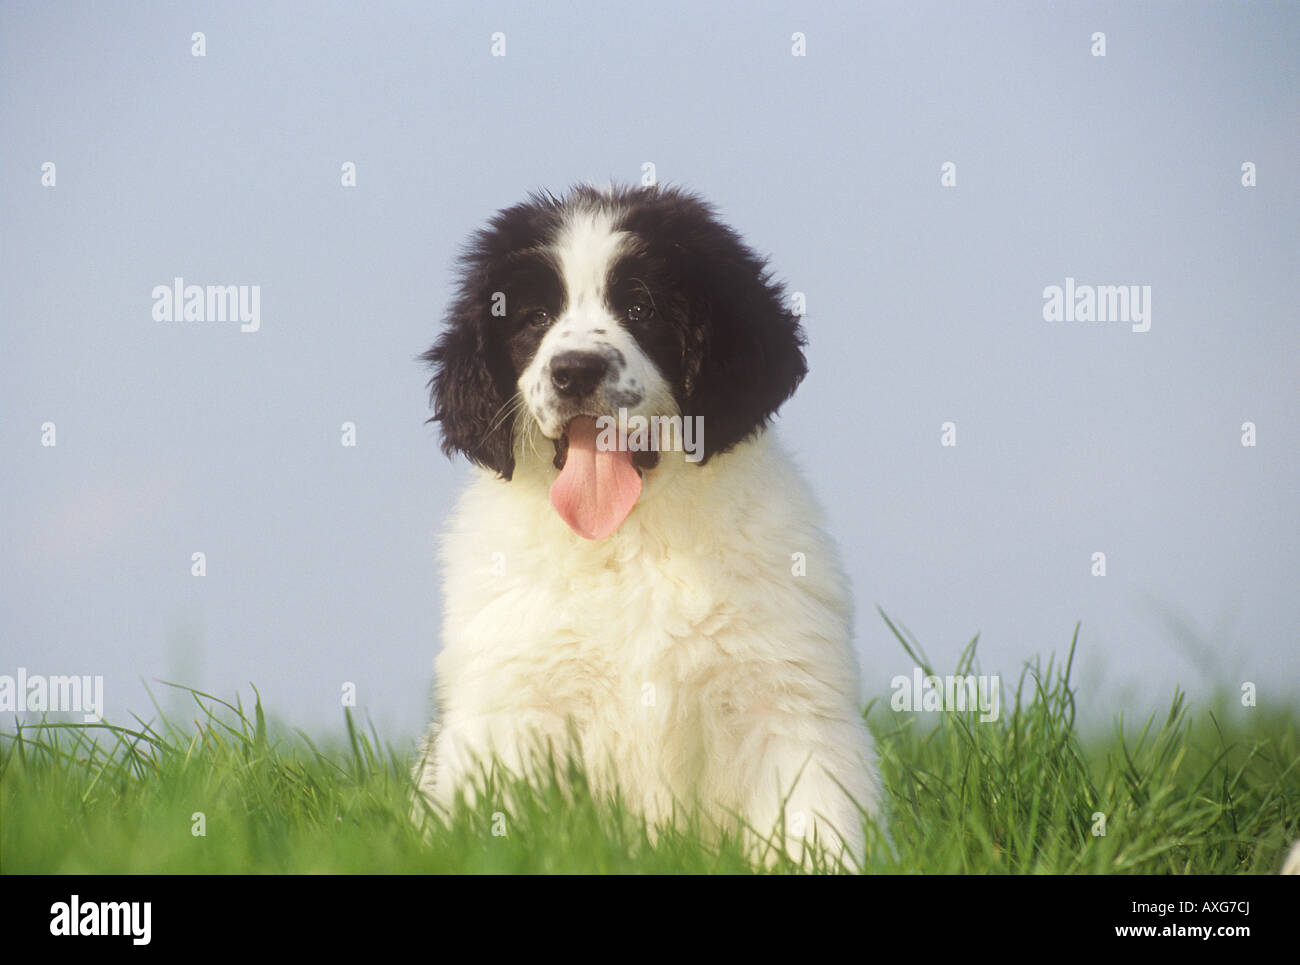 Landseer High Resolution Stock Photography and Images - Alamy